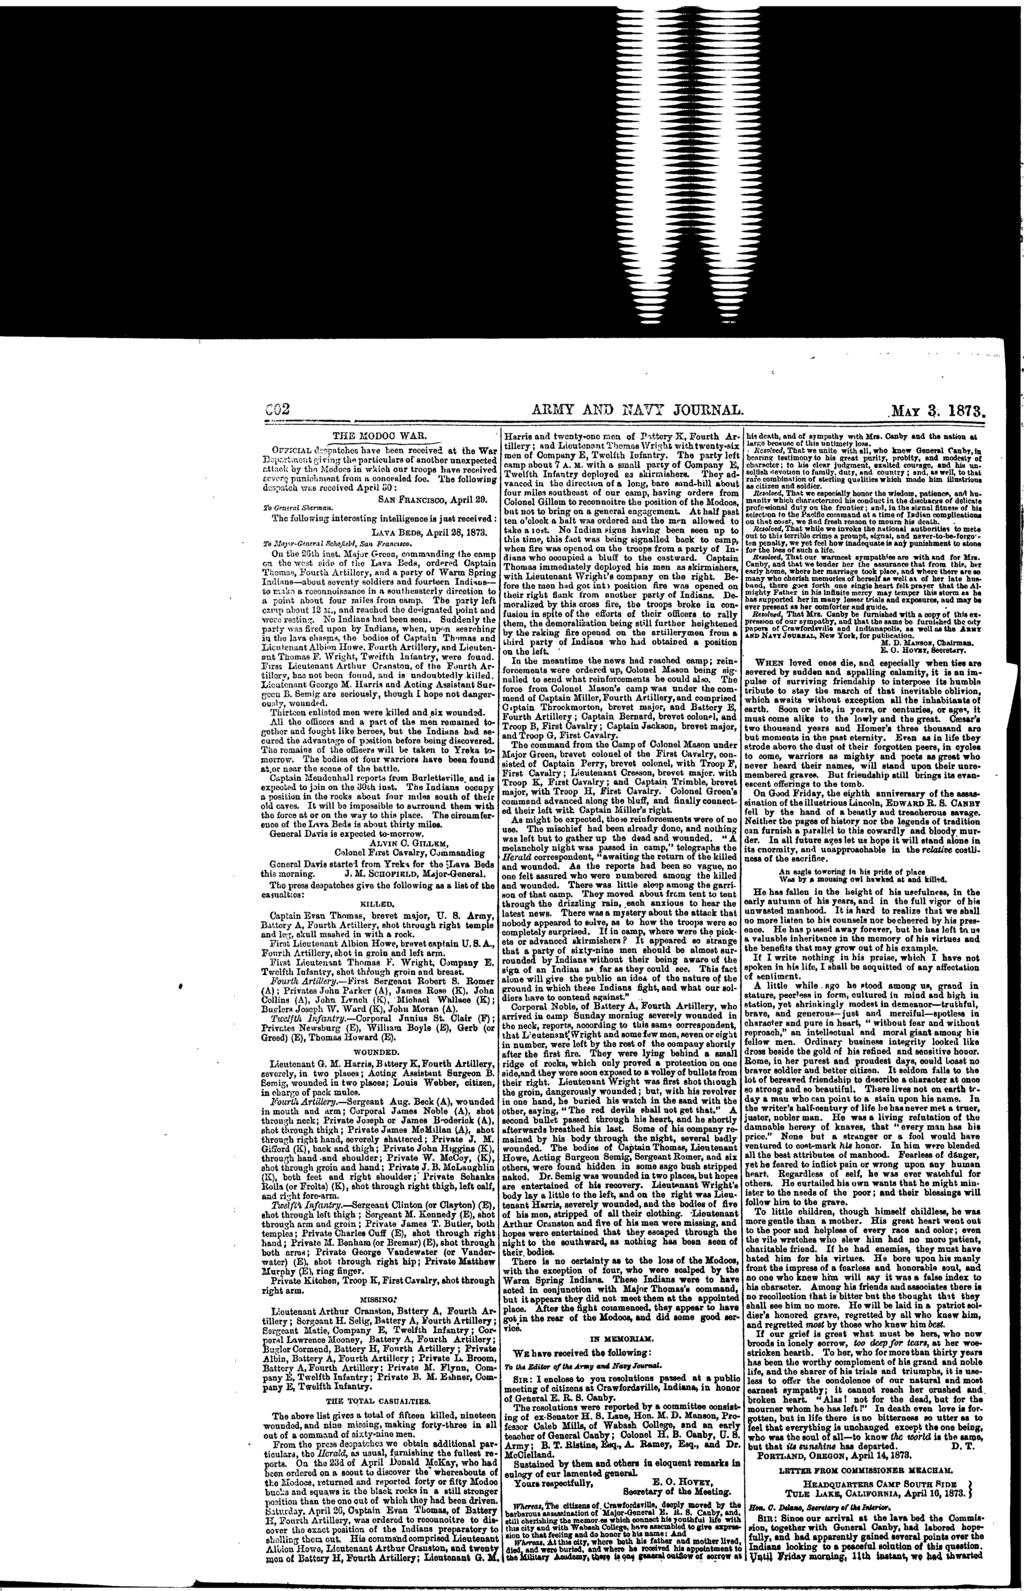 ARMY AND NAVY JOURNAL. MAY 3. 1873. THE LODOO WAR. Hrris twenty-c rmen Pttery K, Four th Ar- hk deth, sympthy Mrs. Cn ths nti tillery; Lieutntt ThomosWright twenty-six lrgs becuse this untimely loss.